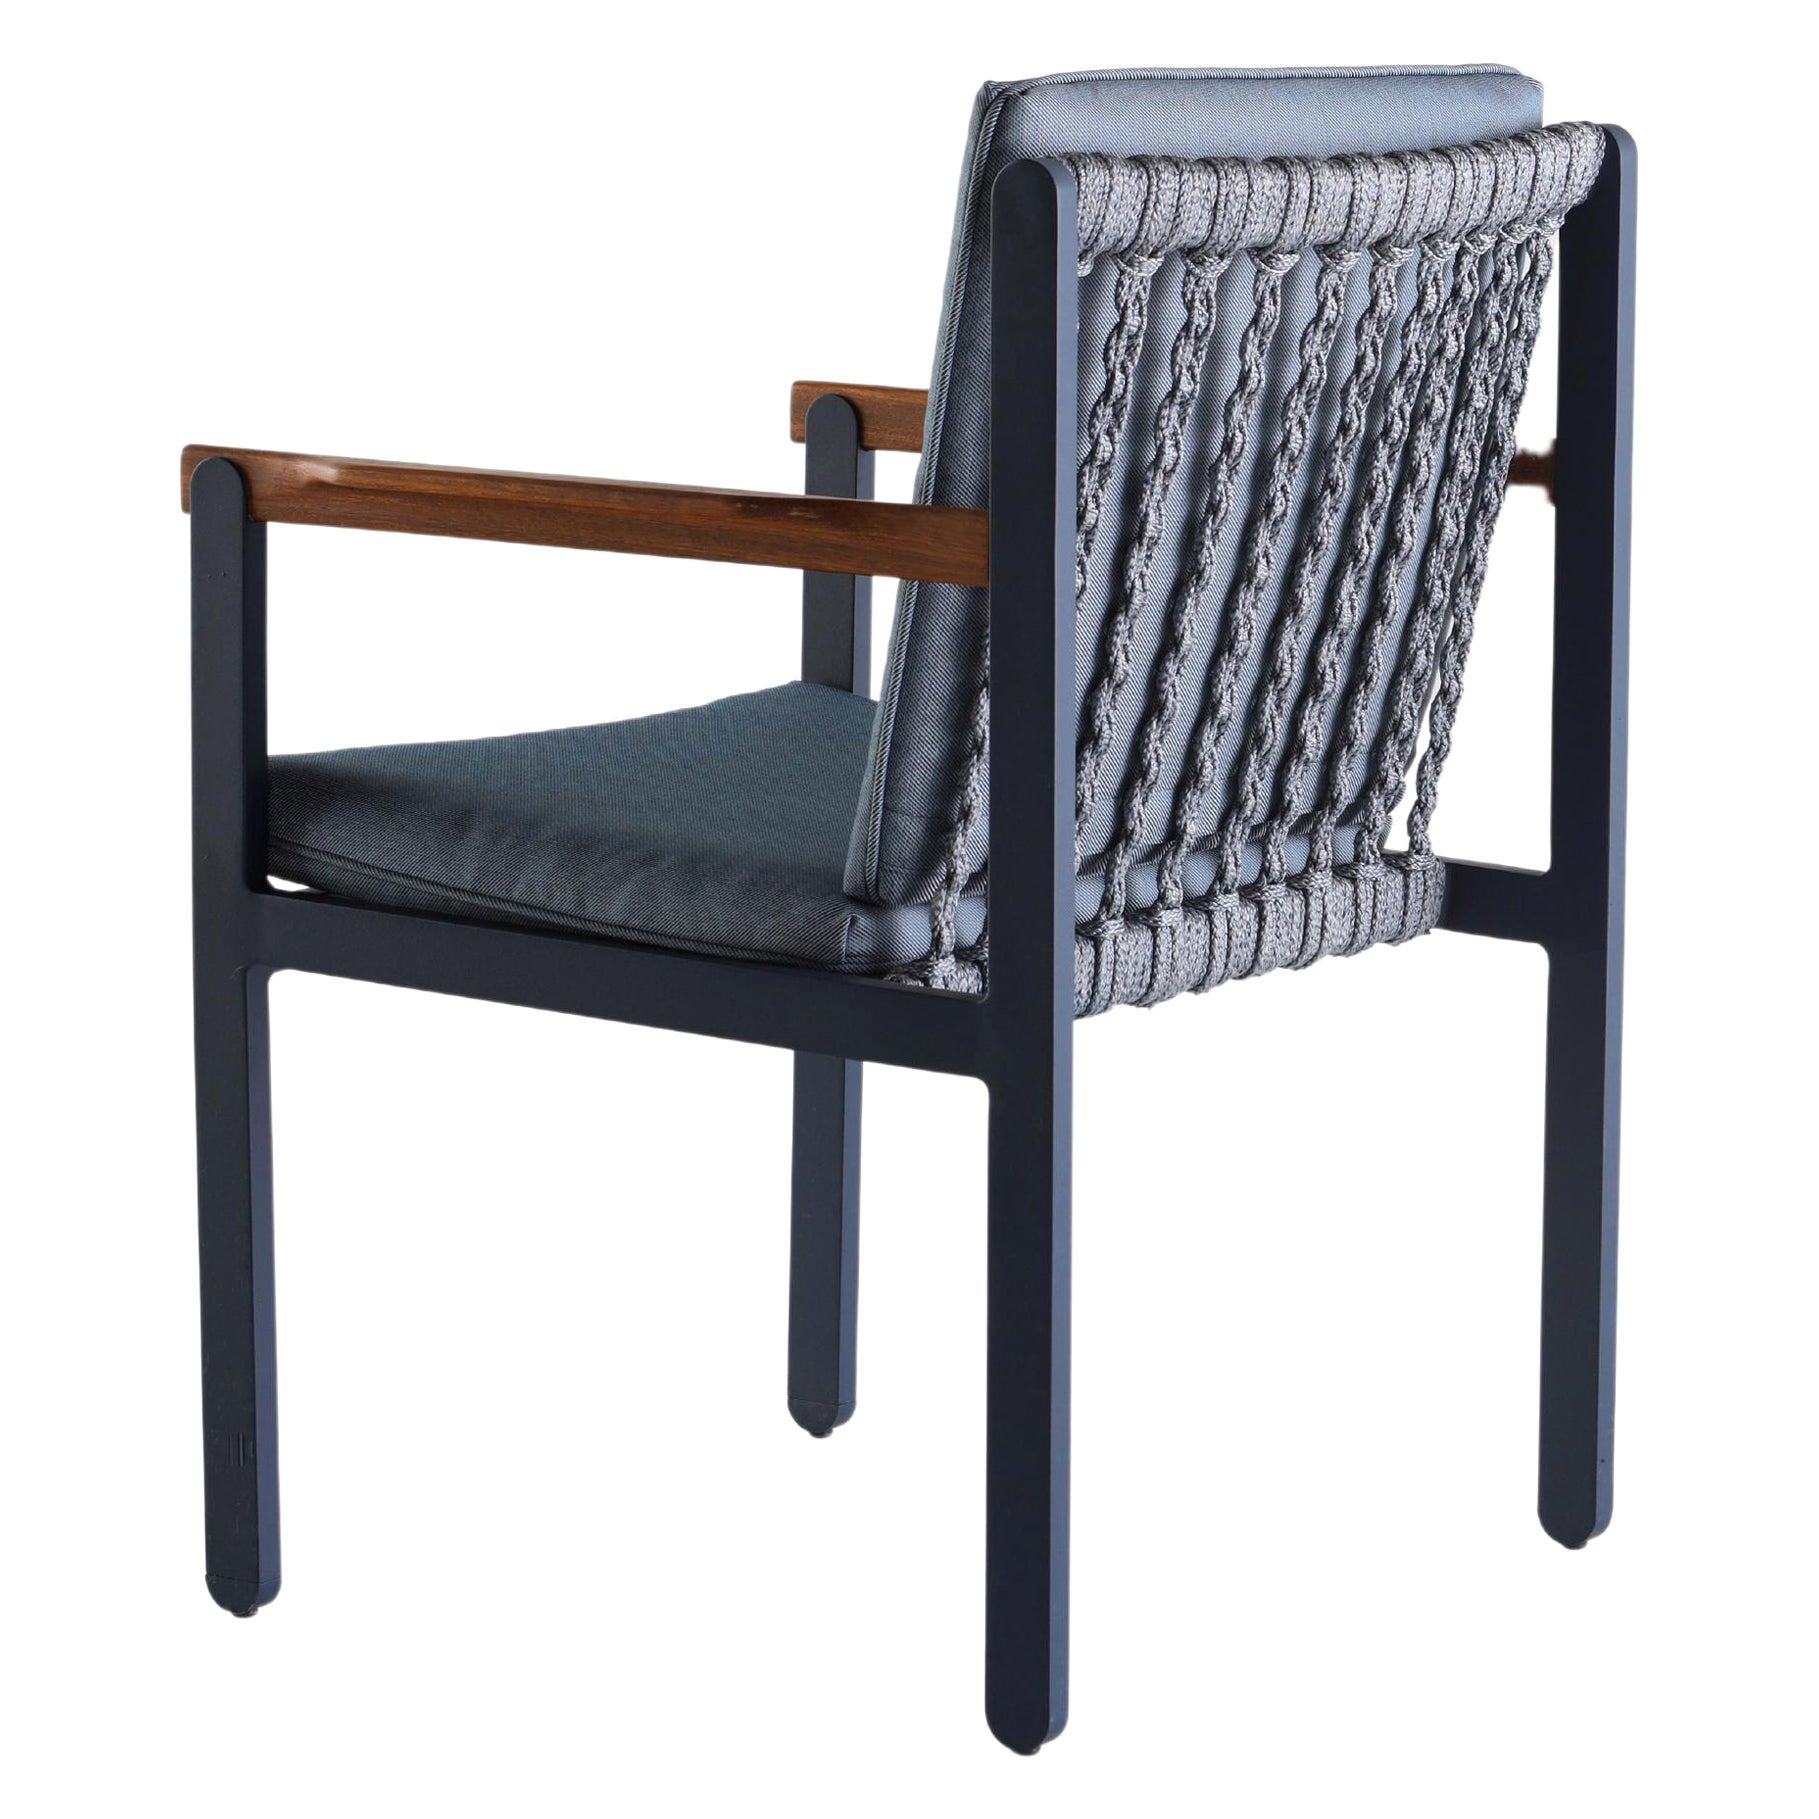 Chair in Metal, Nautical Rope and Textiles for the Outdoors or Indoors For Sale